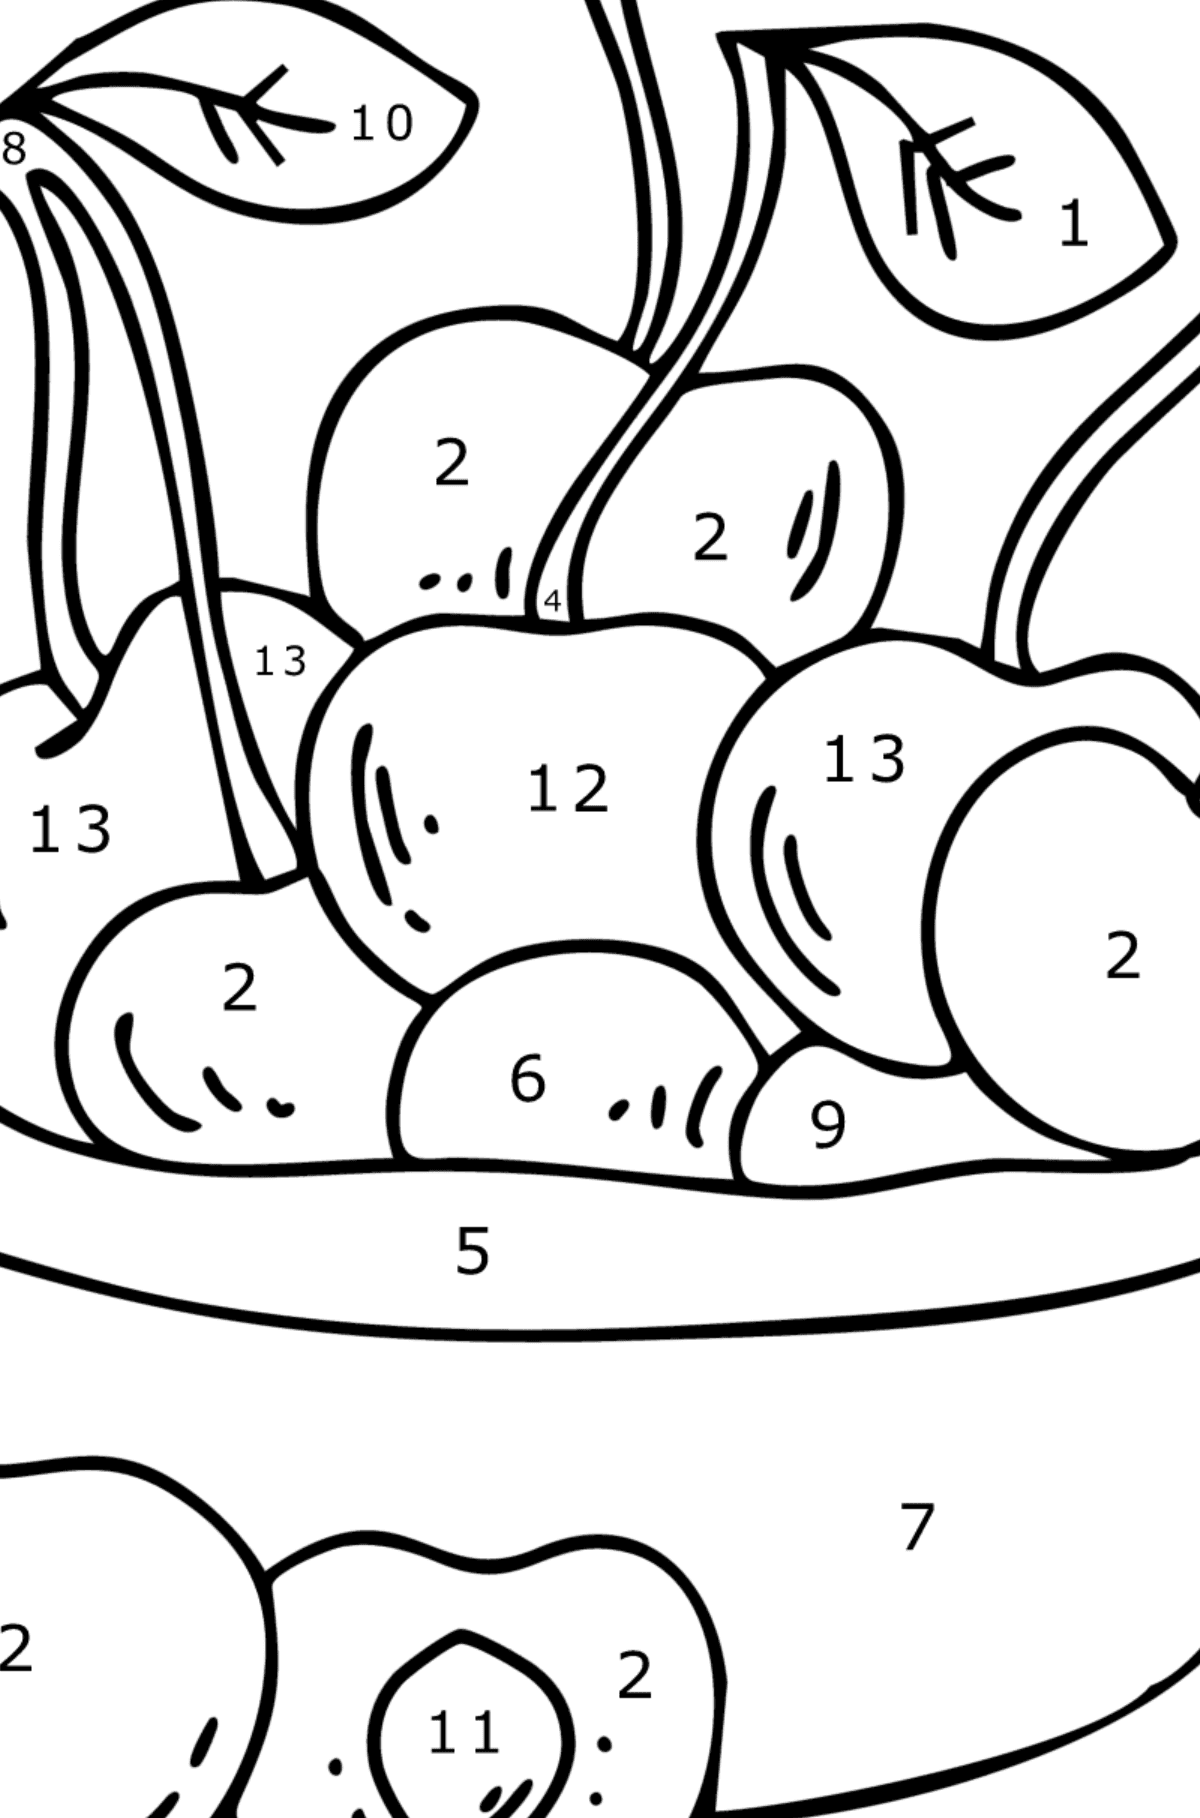 Cherries Plate Coloring Page - Coloring by Numbers for Kids